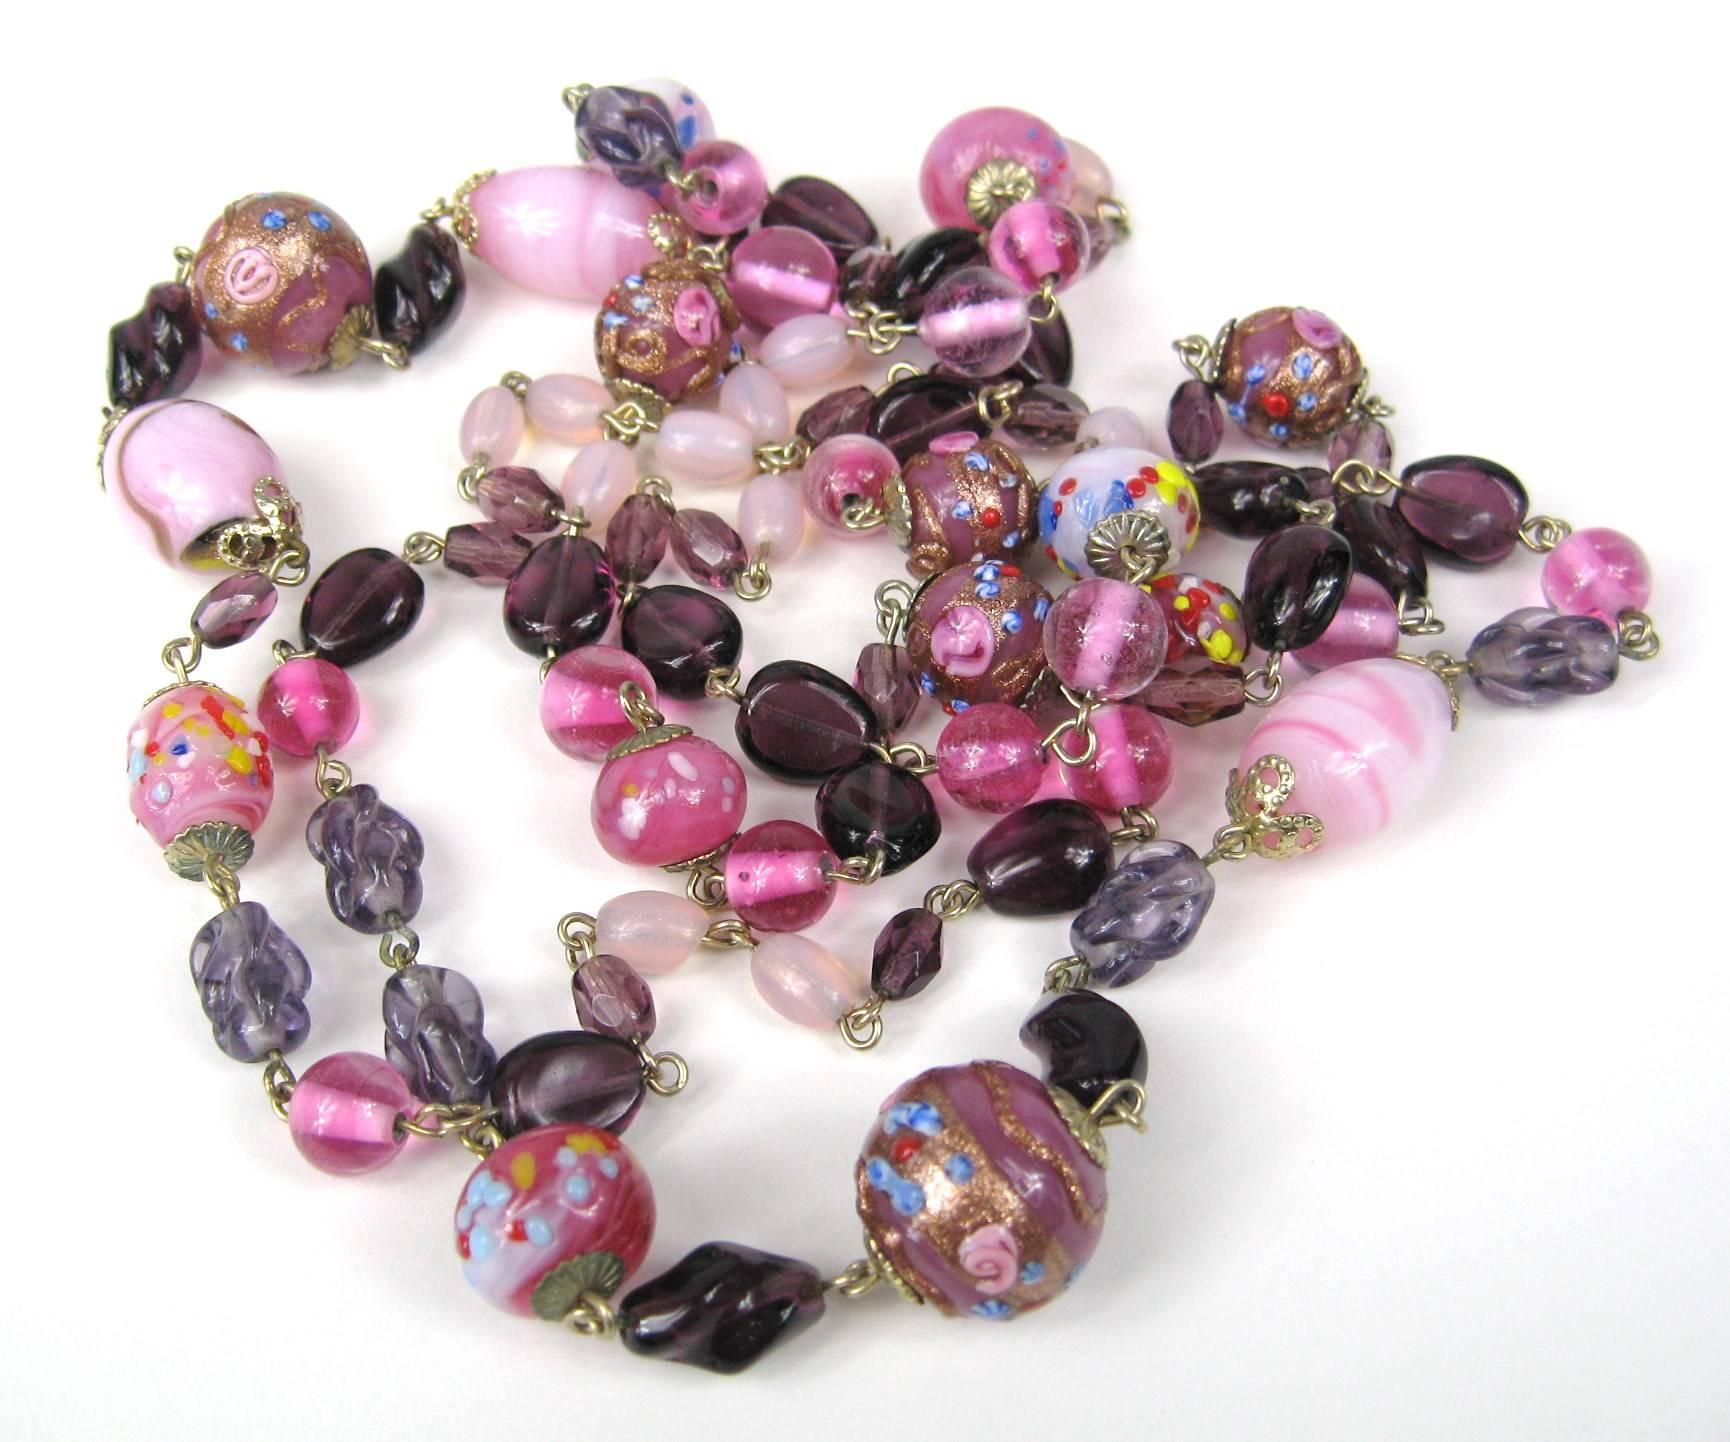 Stunning range of beads on this 1930s necklace *Pink with gold flecked wedding cake beads *Lampwork Beads *Purples and Pinks. Measuring 52 in long. 
This is out of a massive collection of Hopi, Zuni, Navajo, Southwestern, sterling silver, costume